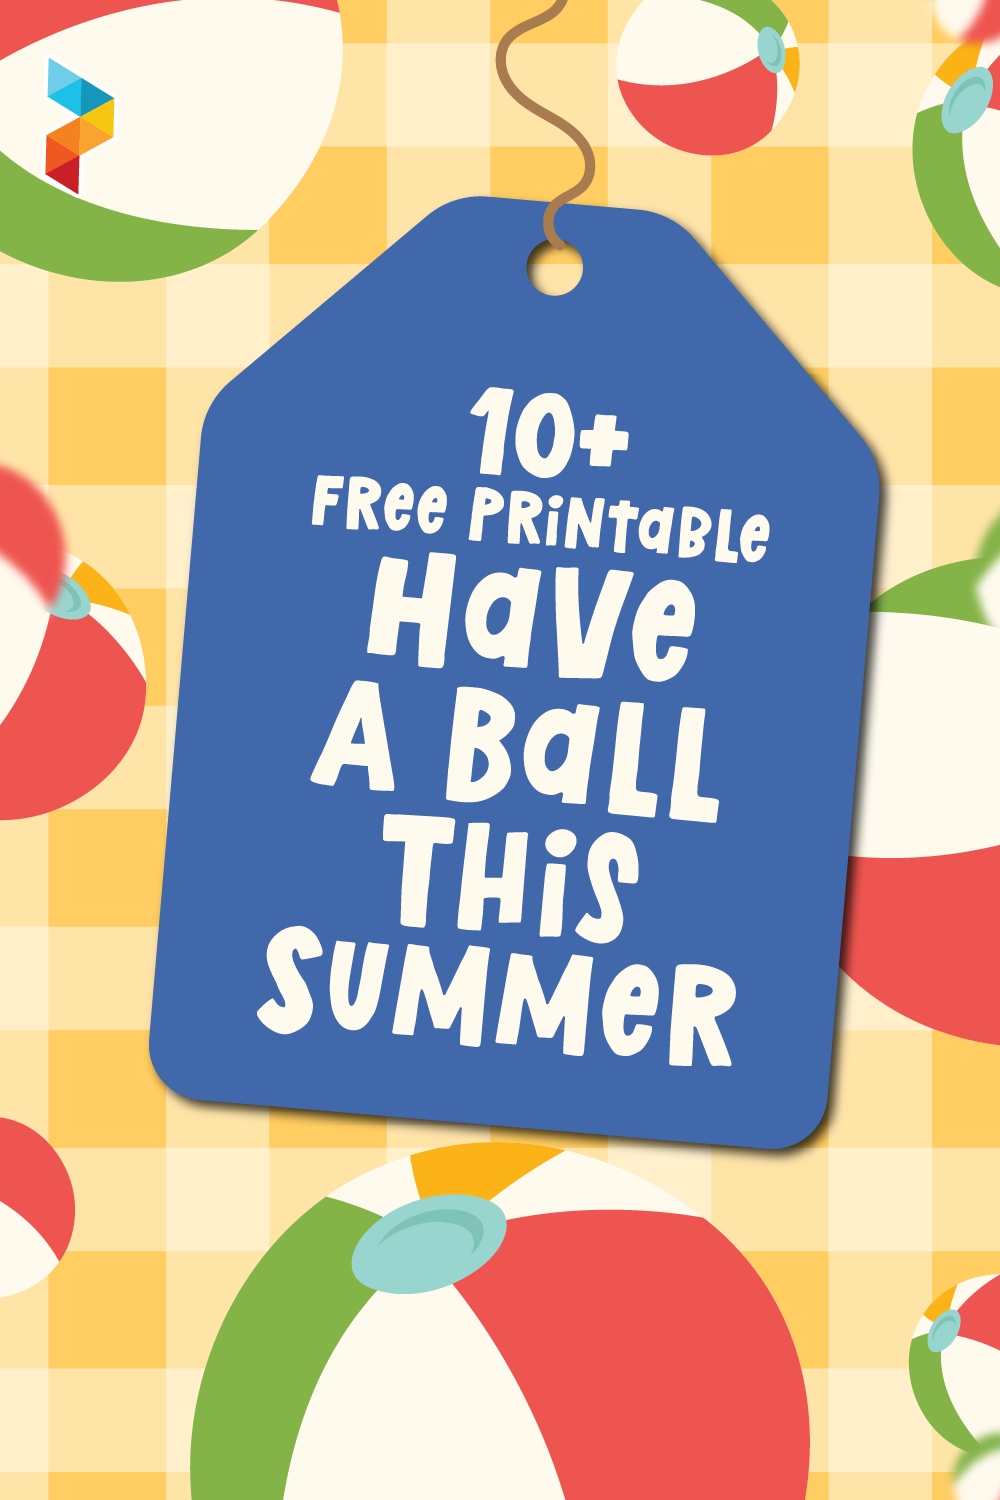 Have A Ball This Summer